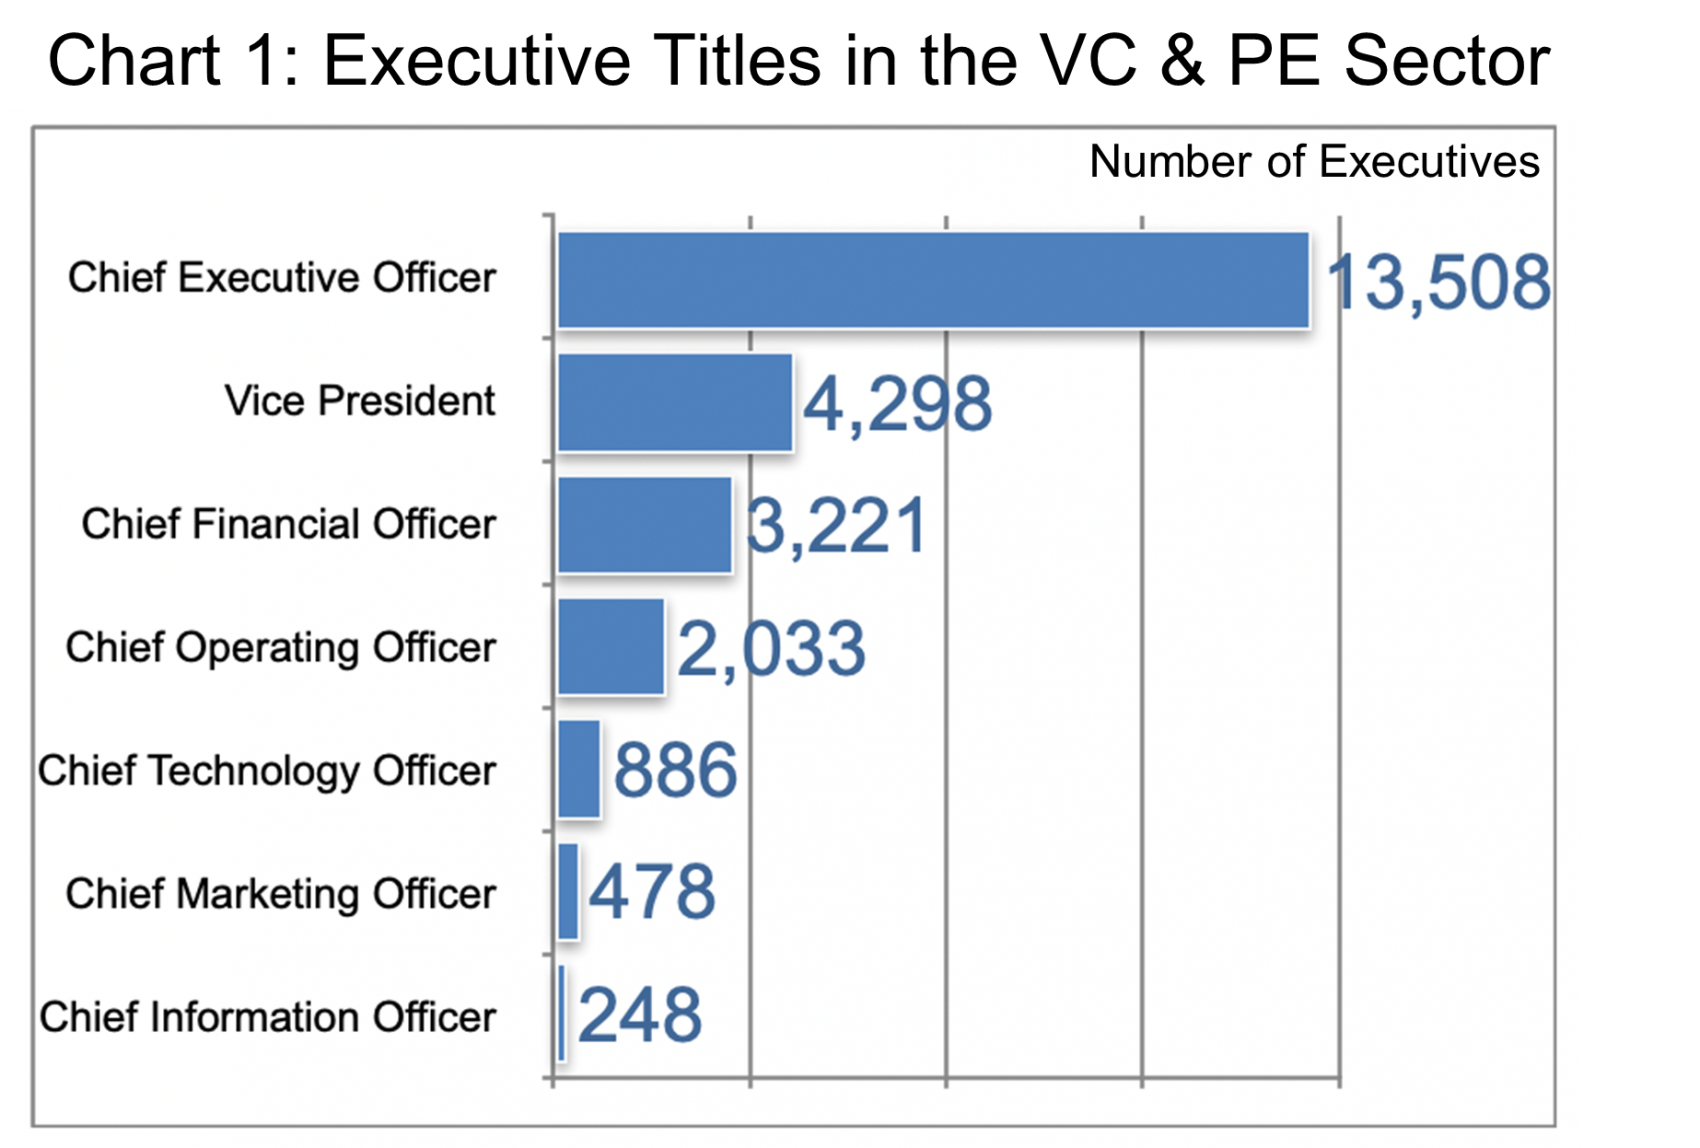 Executive Titles in the VC & PE Sector: Chart 1